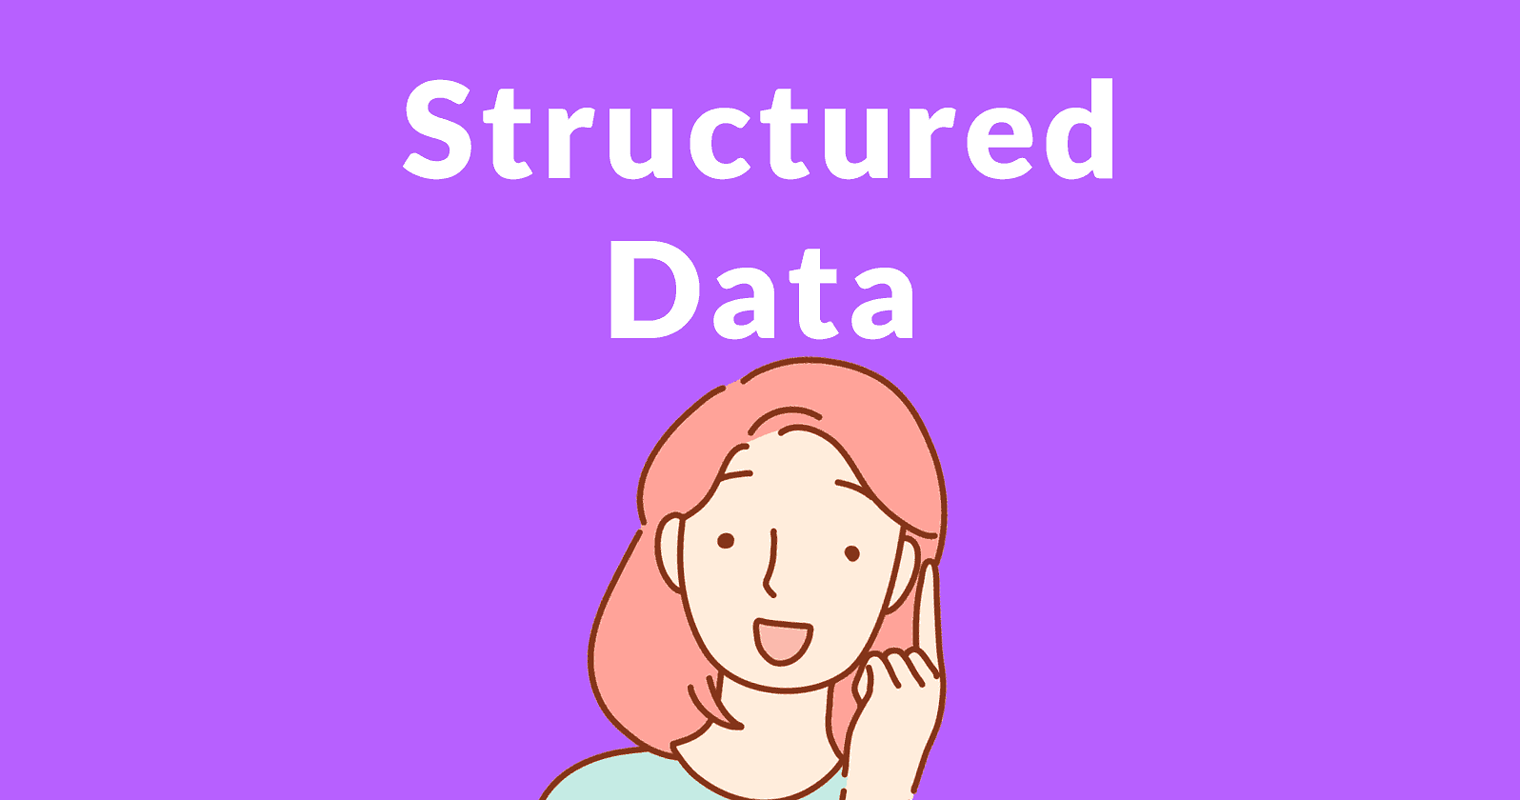 John Mueller Answers About Structured Data and Rankings